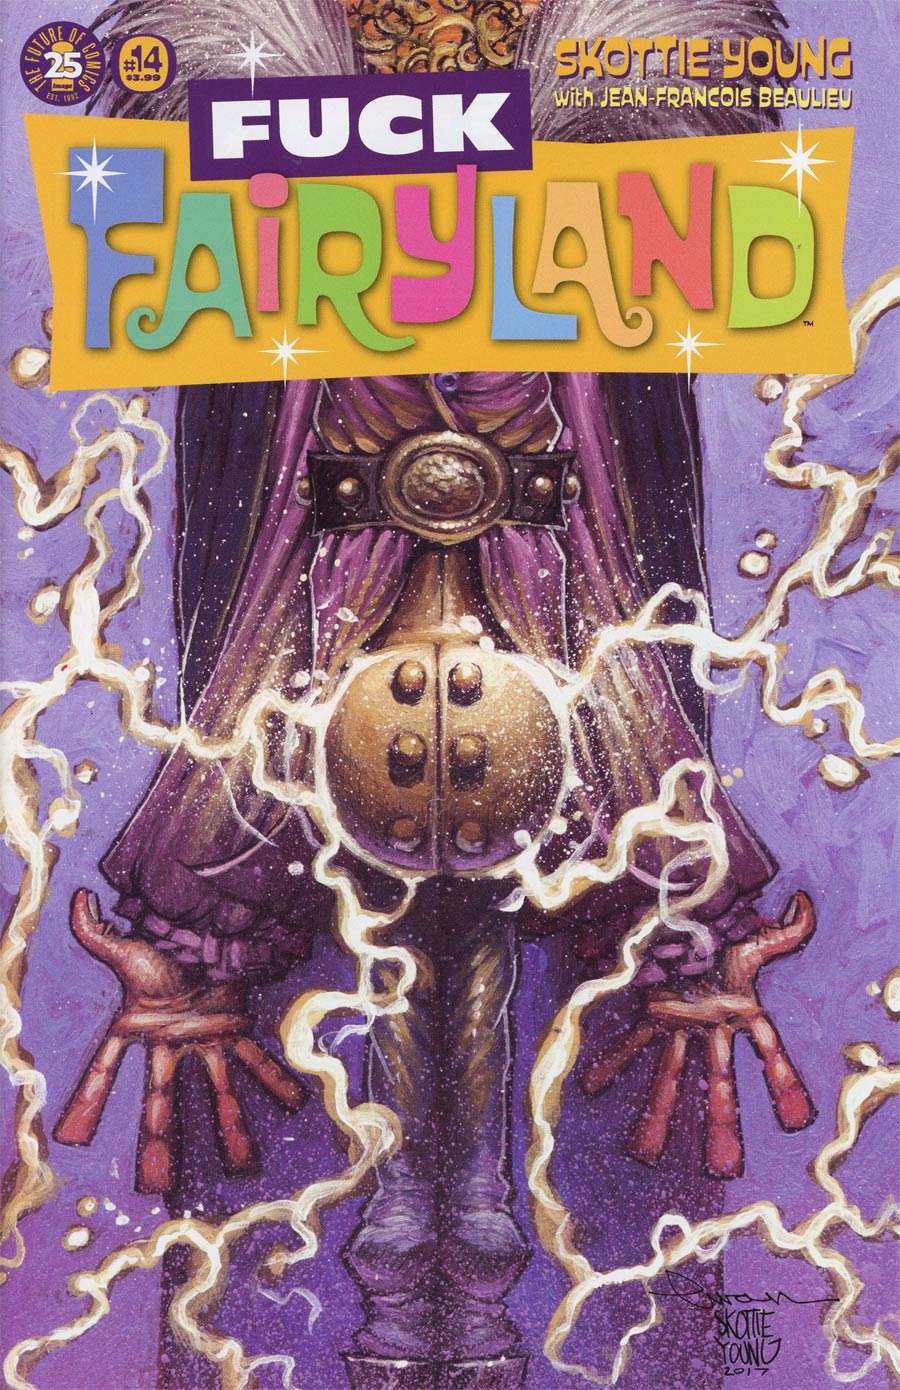 I Hate Fairyland #14 Cover B Variant Skottie Young F*ck Fairyland Cover